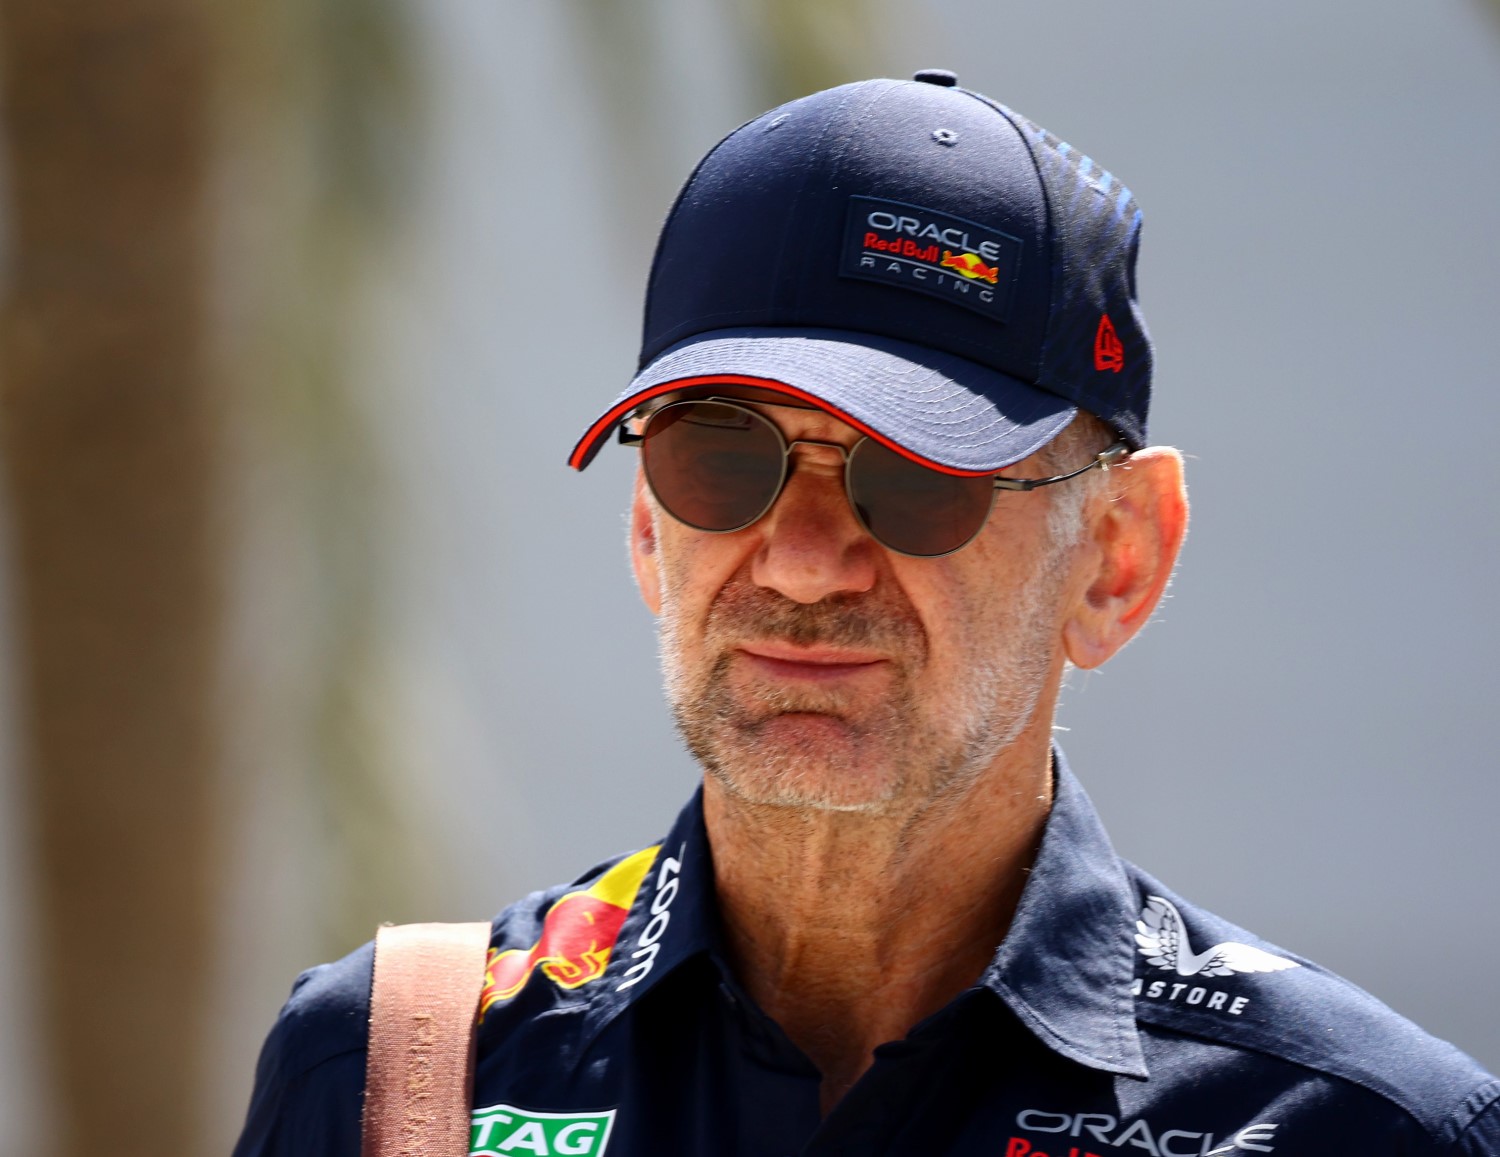 Adrian Newey, the Chief Technical Officer of Red Bull Racing walks in the Paddock prior to practice ahead of the F1 Grand Prix of Bahrain at Bahrain International Circuit on March 03, 2023 in Bahrain, Bahrain. (Photo by Mark Thompson/Getty Images) // Getty Images / Red Bull Content Pool